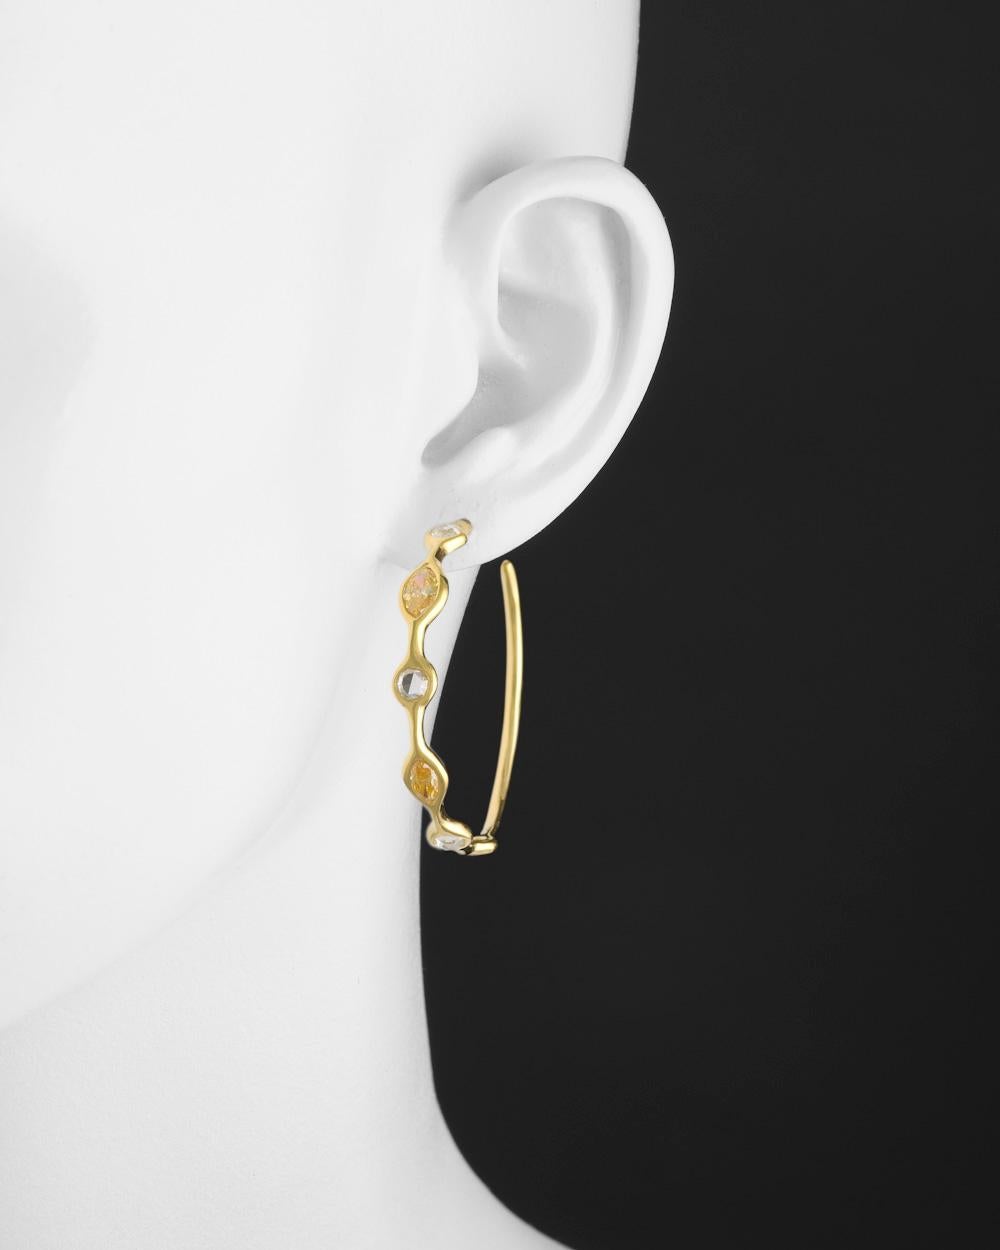 Large mixed-cut yellow and white diamond hoop earrings in handcrafted, free-form 18k yellow gold, set to the front with two marquise-shaped yellow diamonds, two round-cut yellow diamonds, and six round rose-cut near-colorless diamonds. The twelve